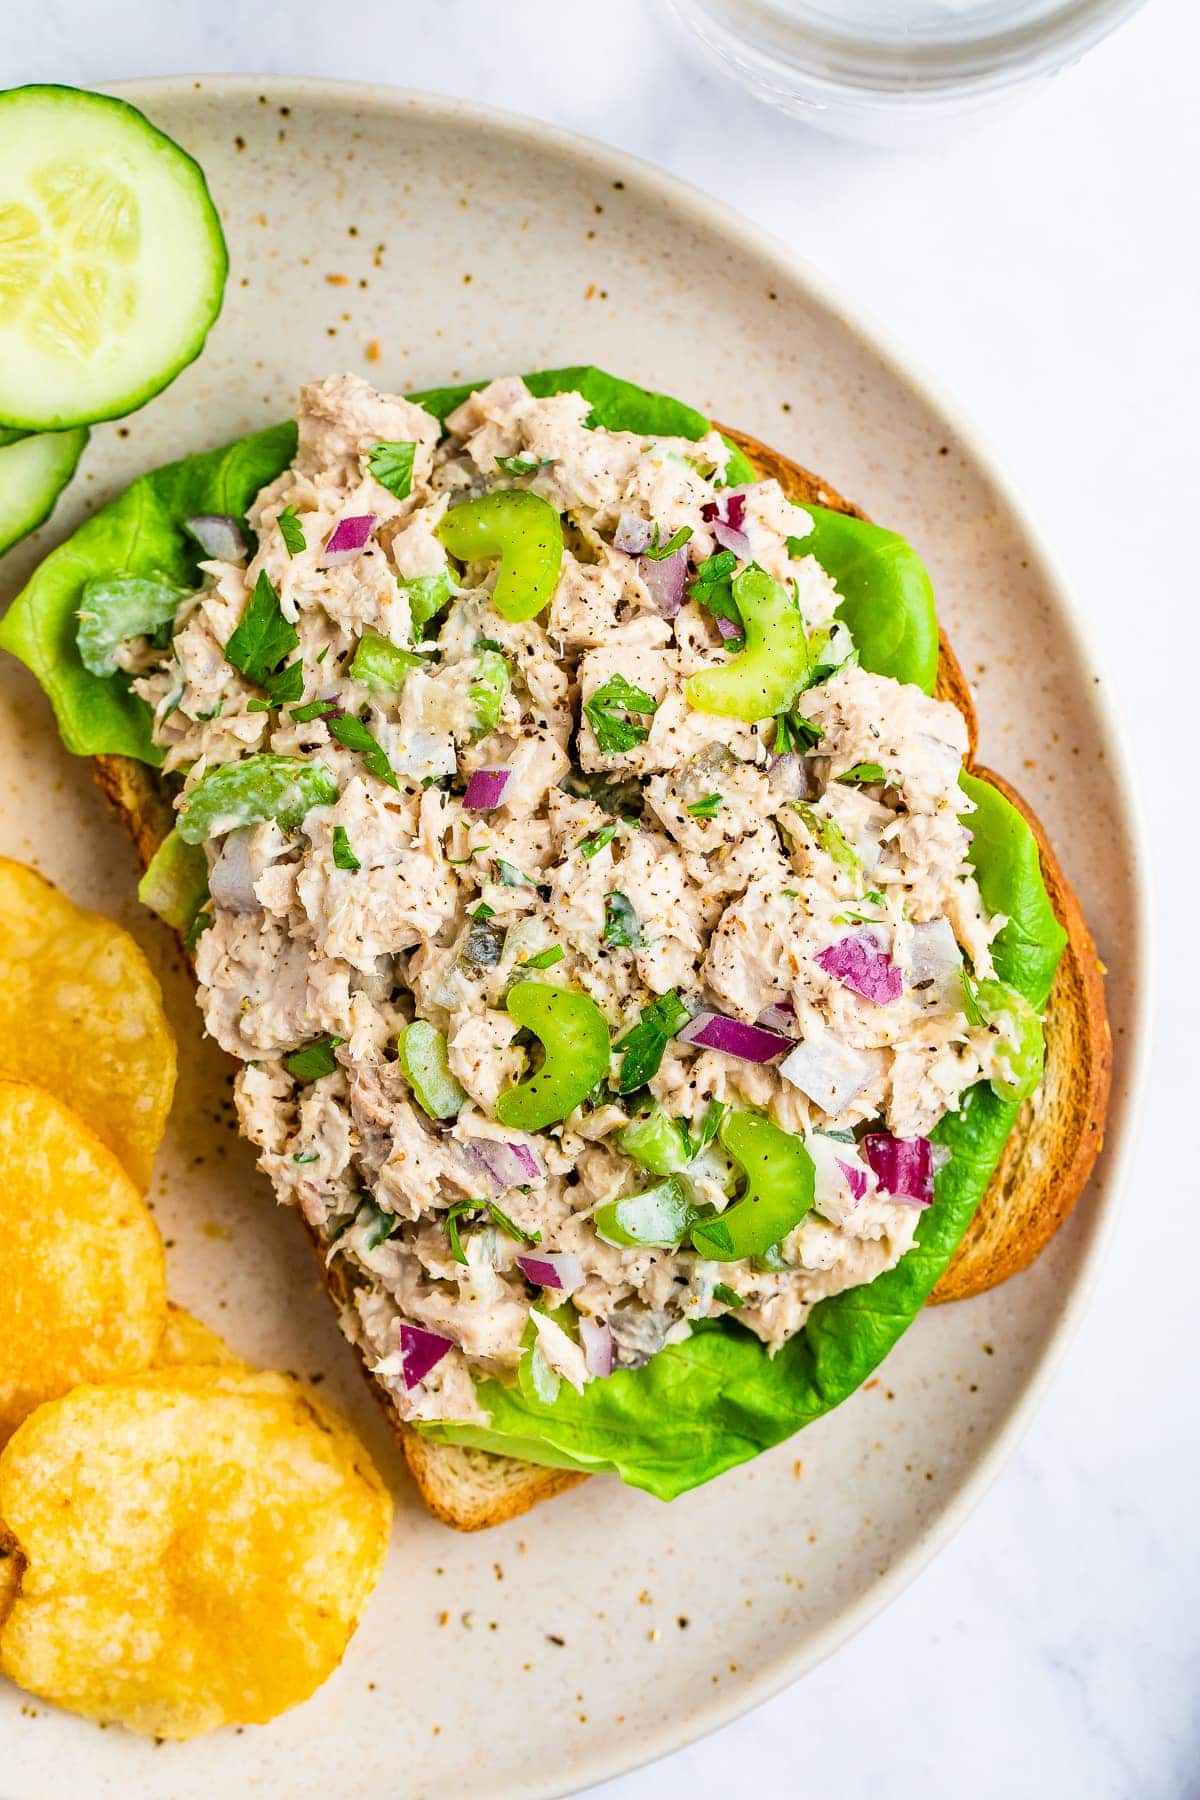 Tuna salad on an open face sandwich with lettuce. On a plate with chips and cucumbers.